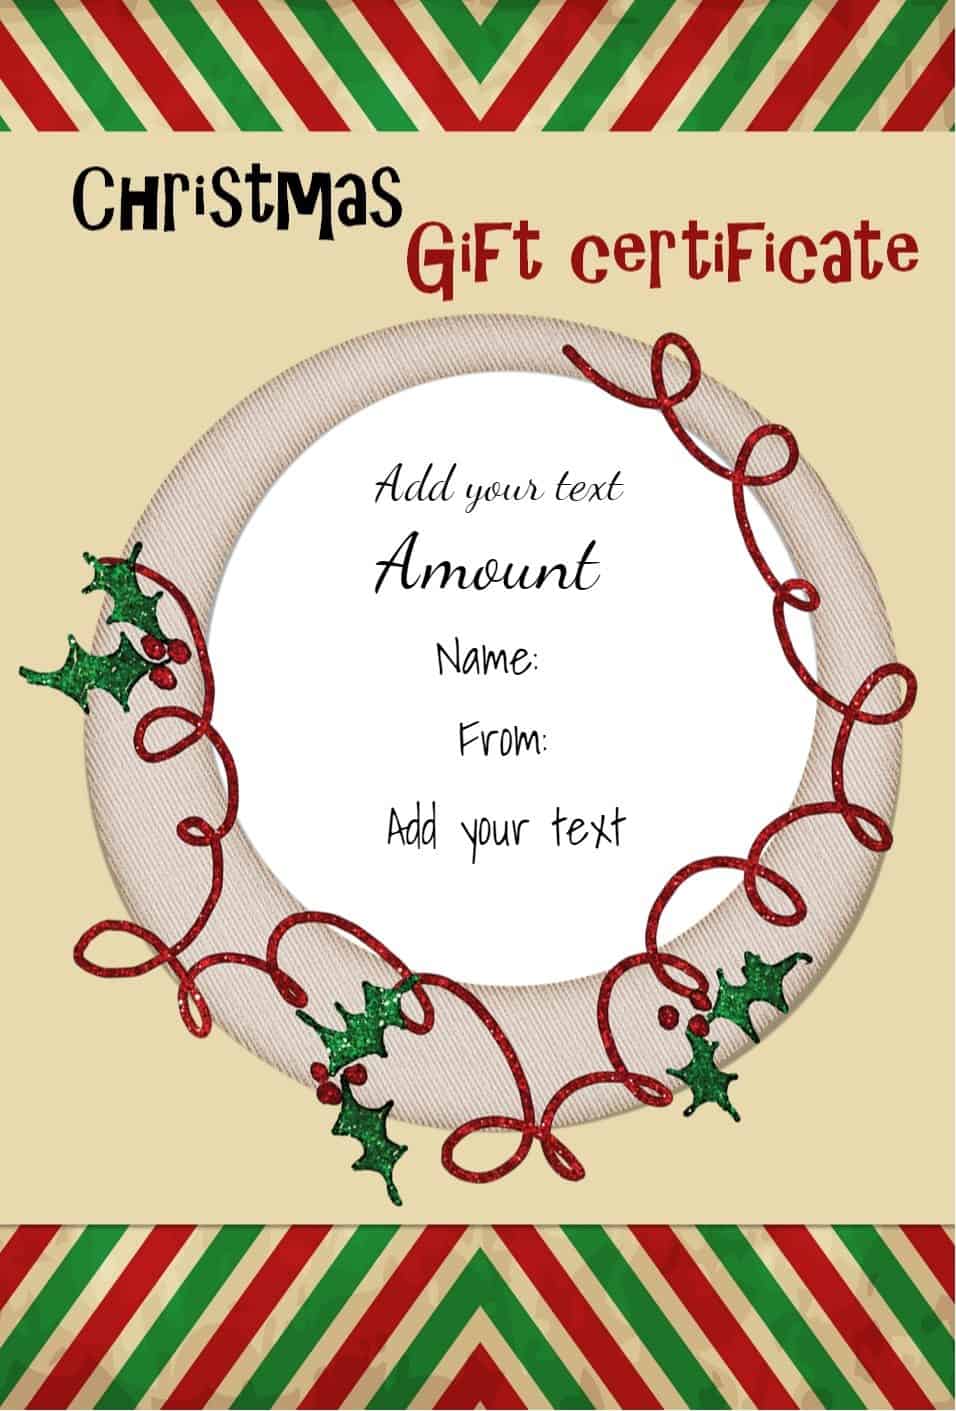 14-new-year-gift-certificate-templates-free-printable-word-p-free